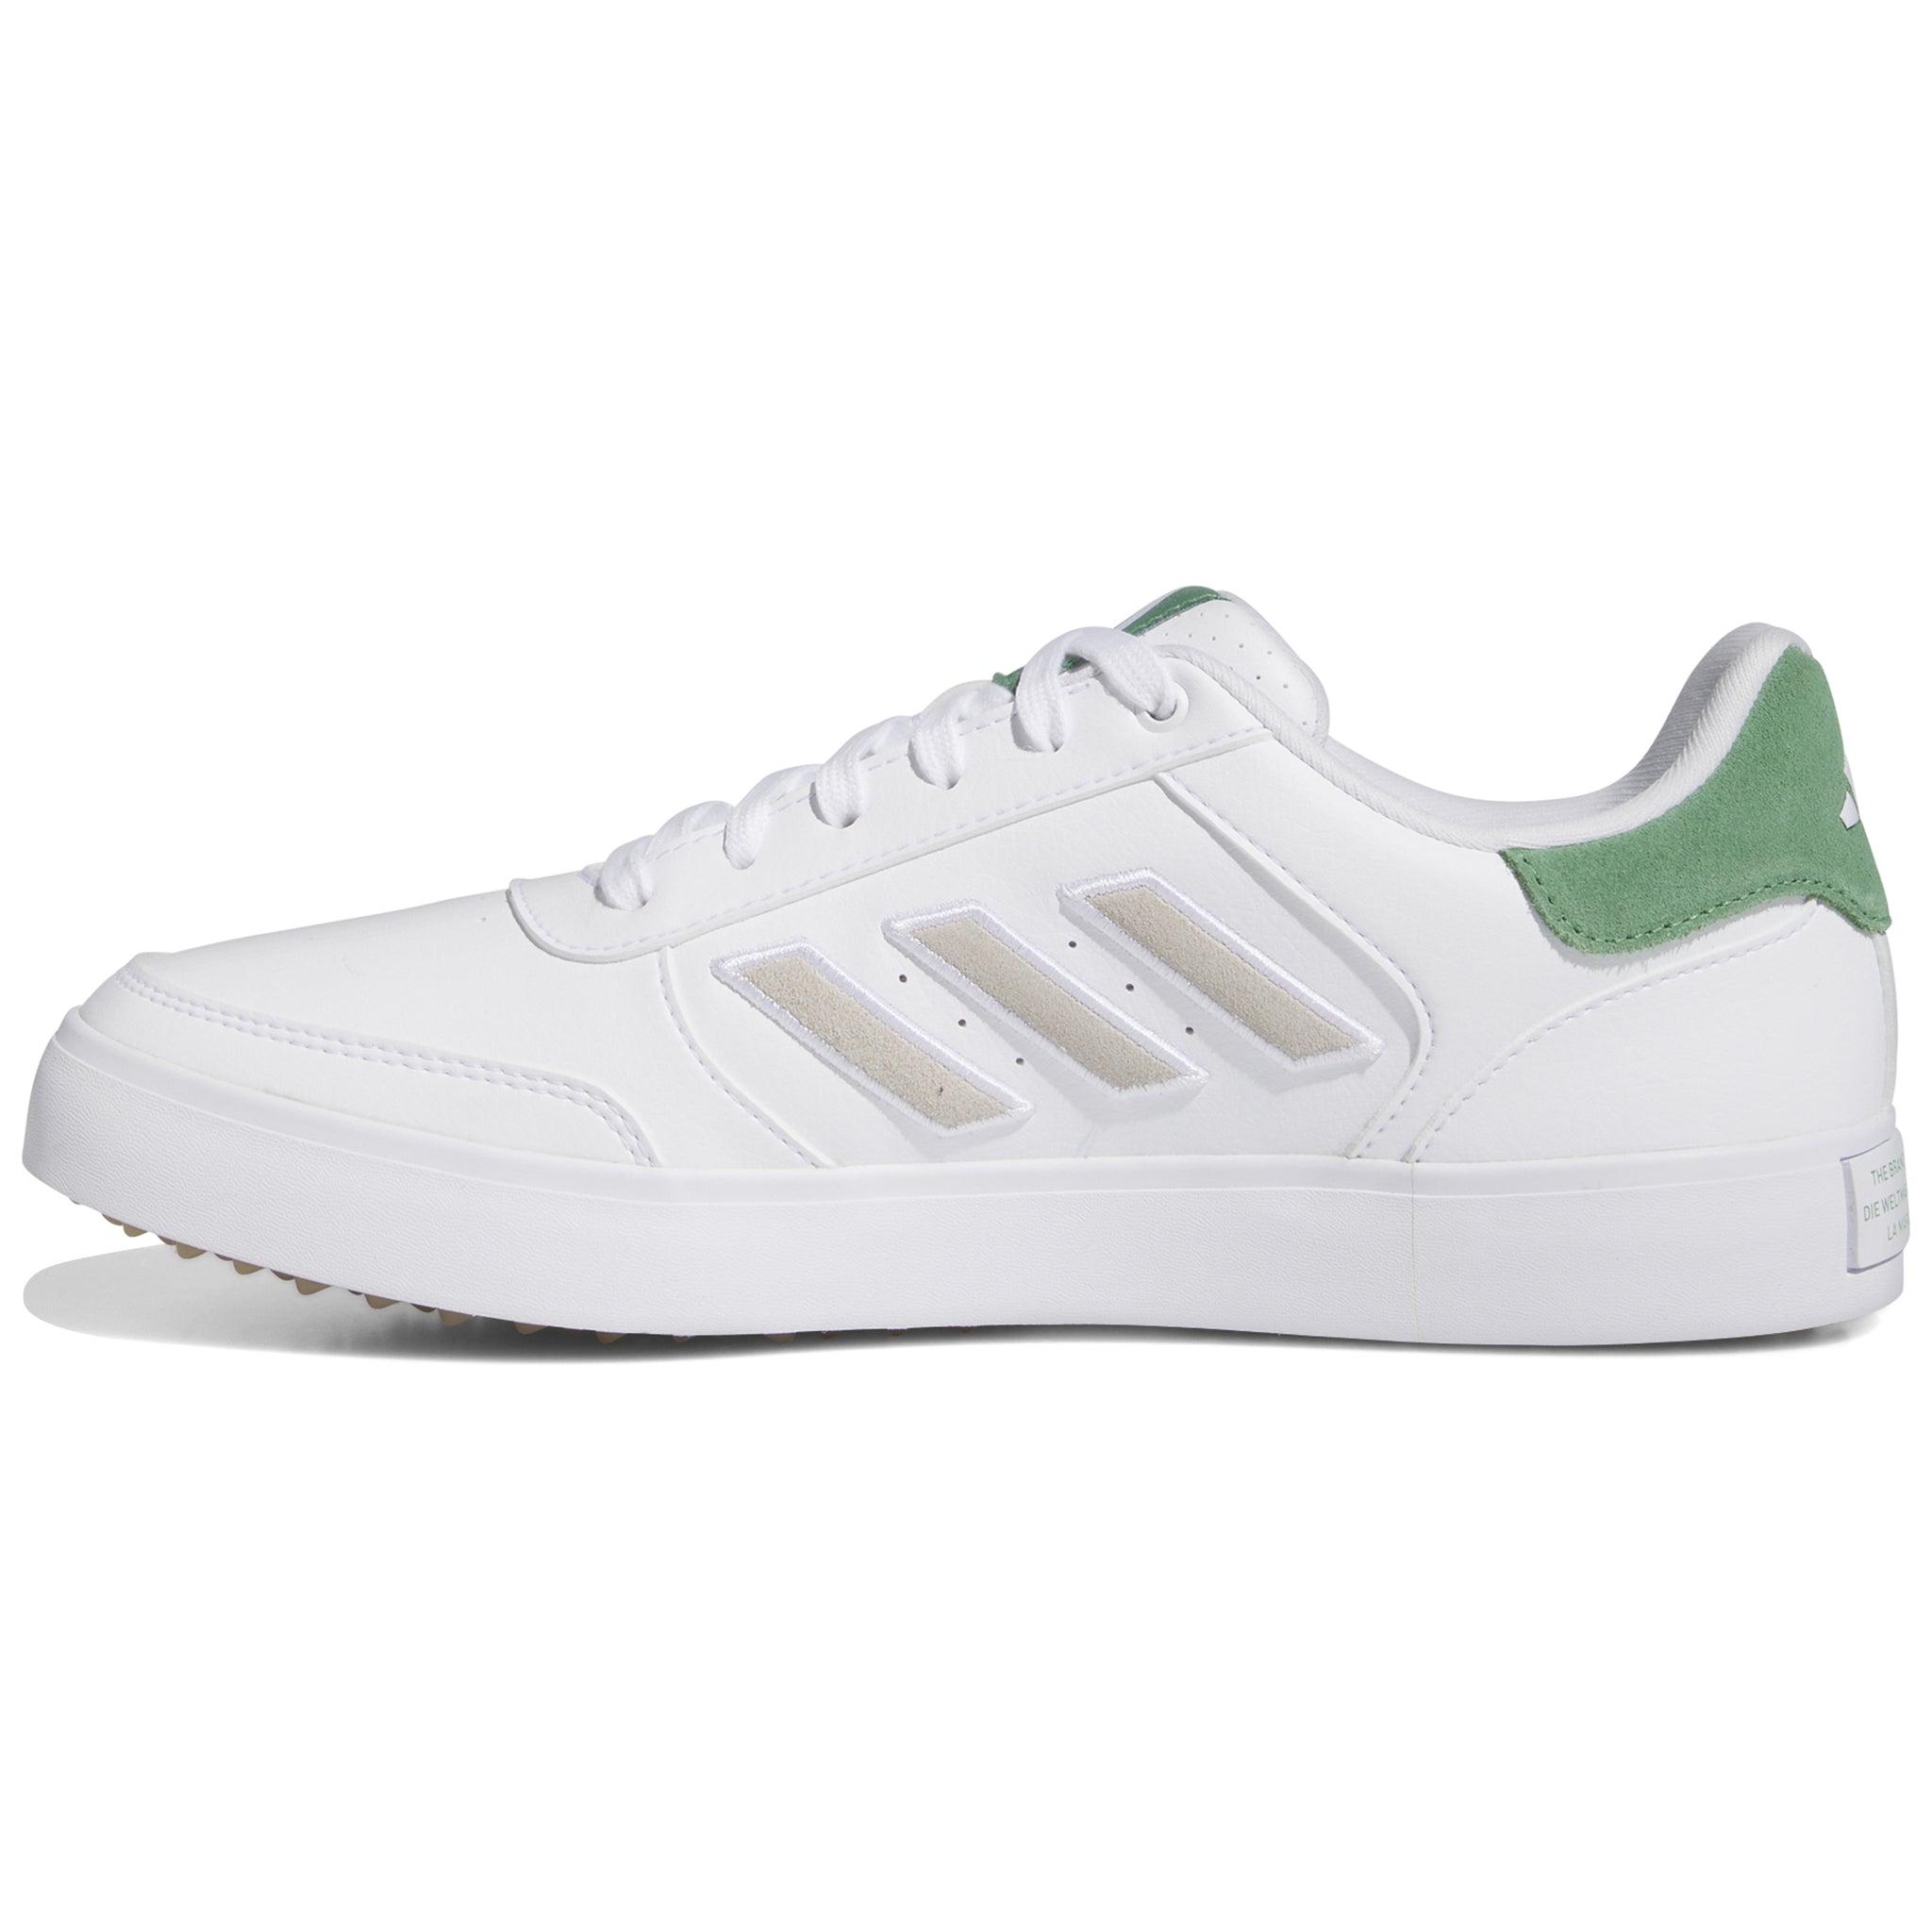 adidas Retrocross 24 Golf Shoes IG3279 White Preloved Green | Function18